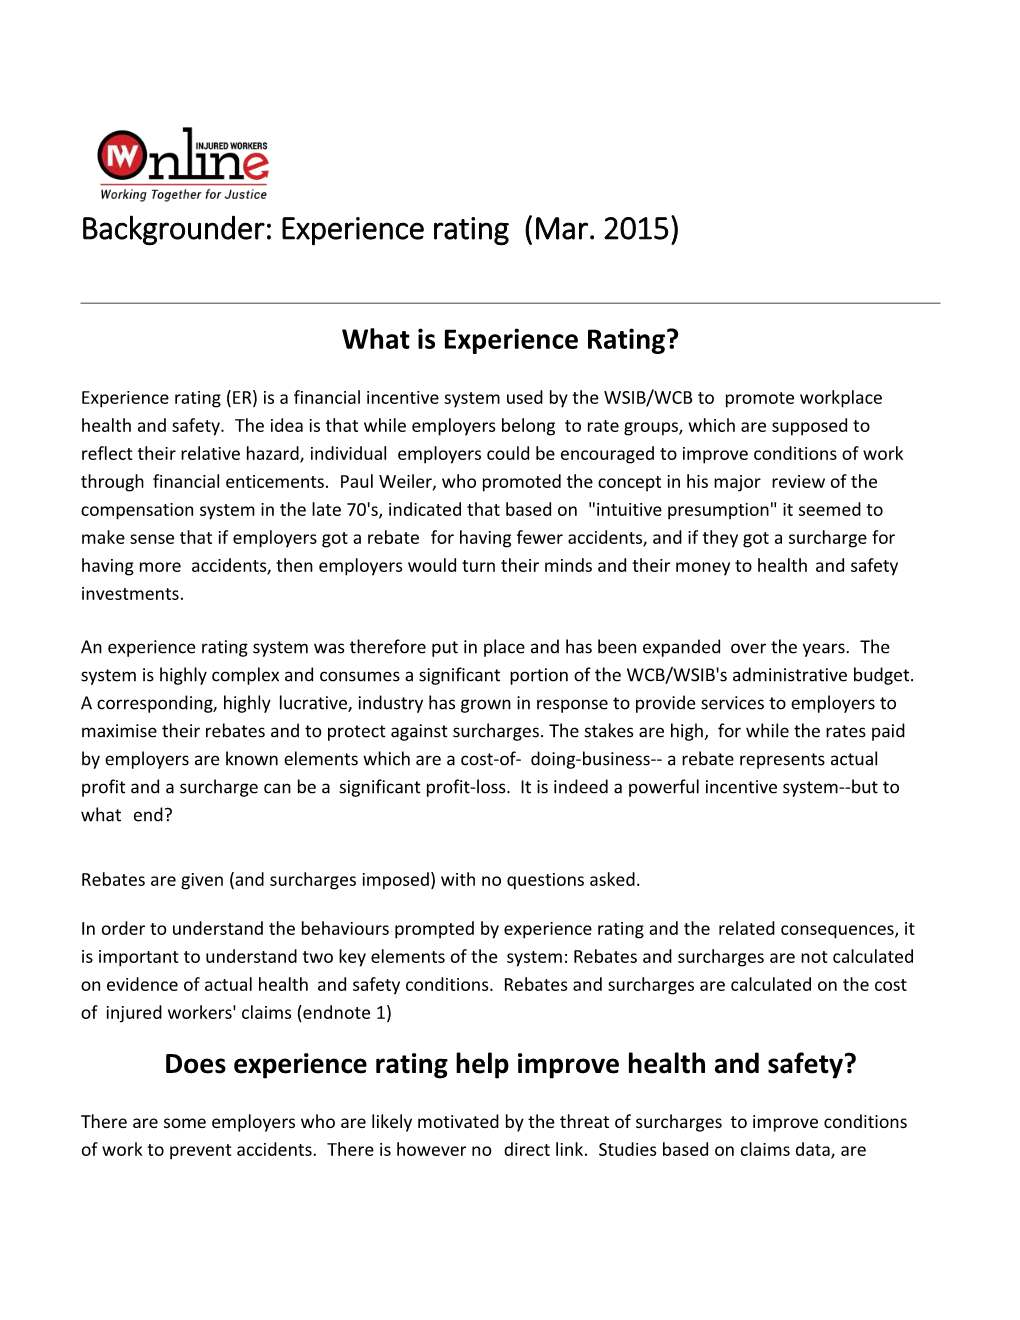 Backgrounder: Experience Rating (Mar. 2015)